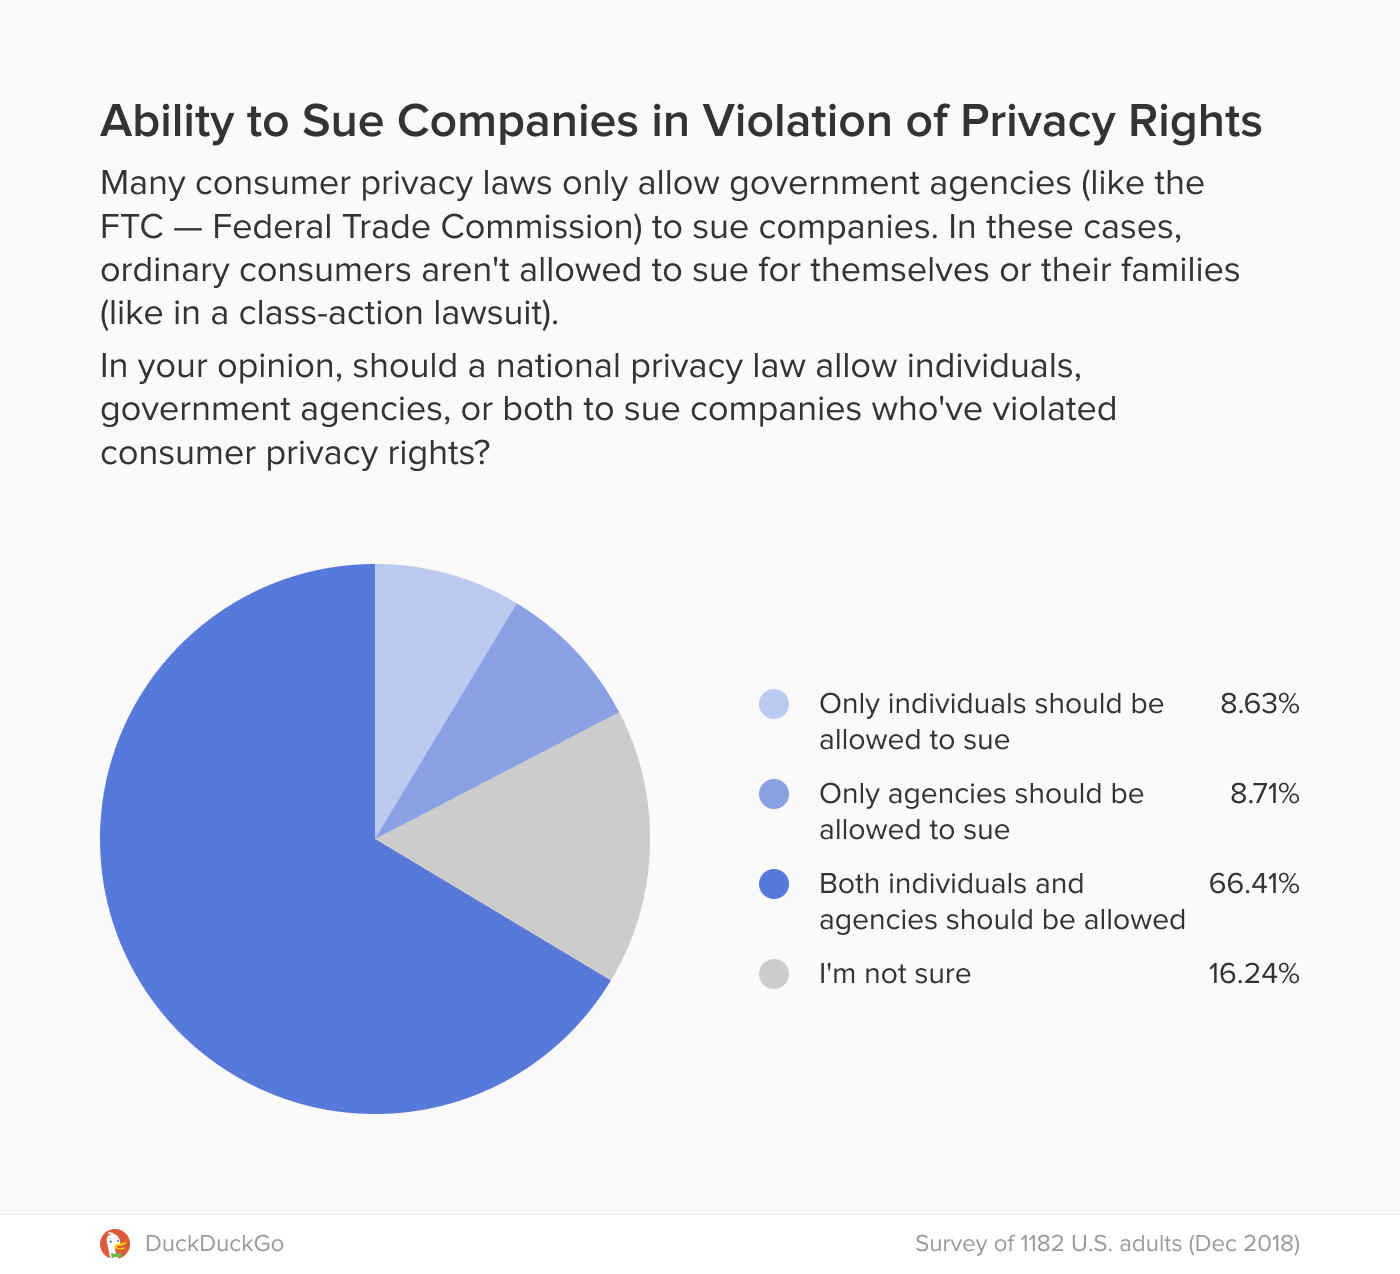 Chart showing support for the right to sue companies violating consumer privacy rights.